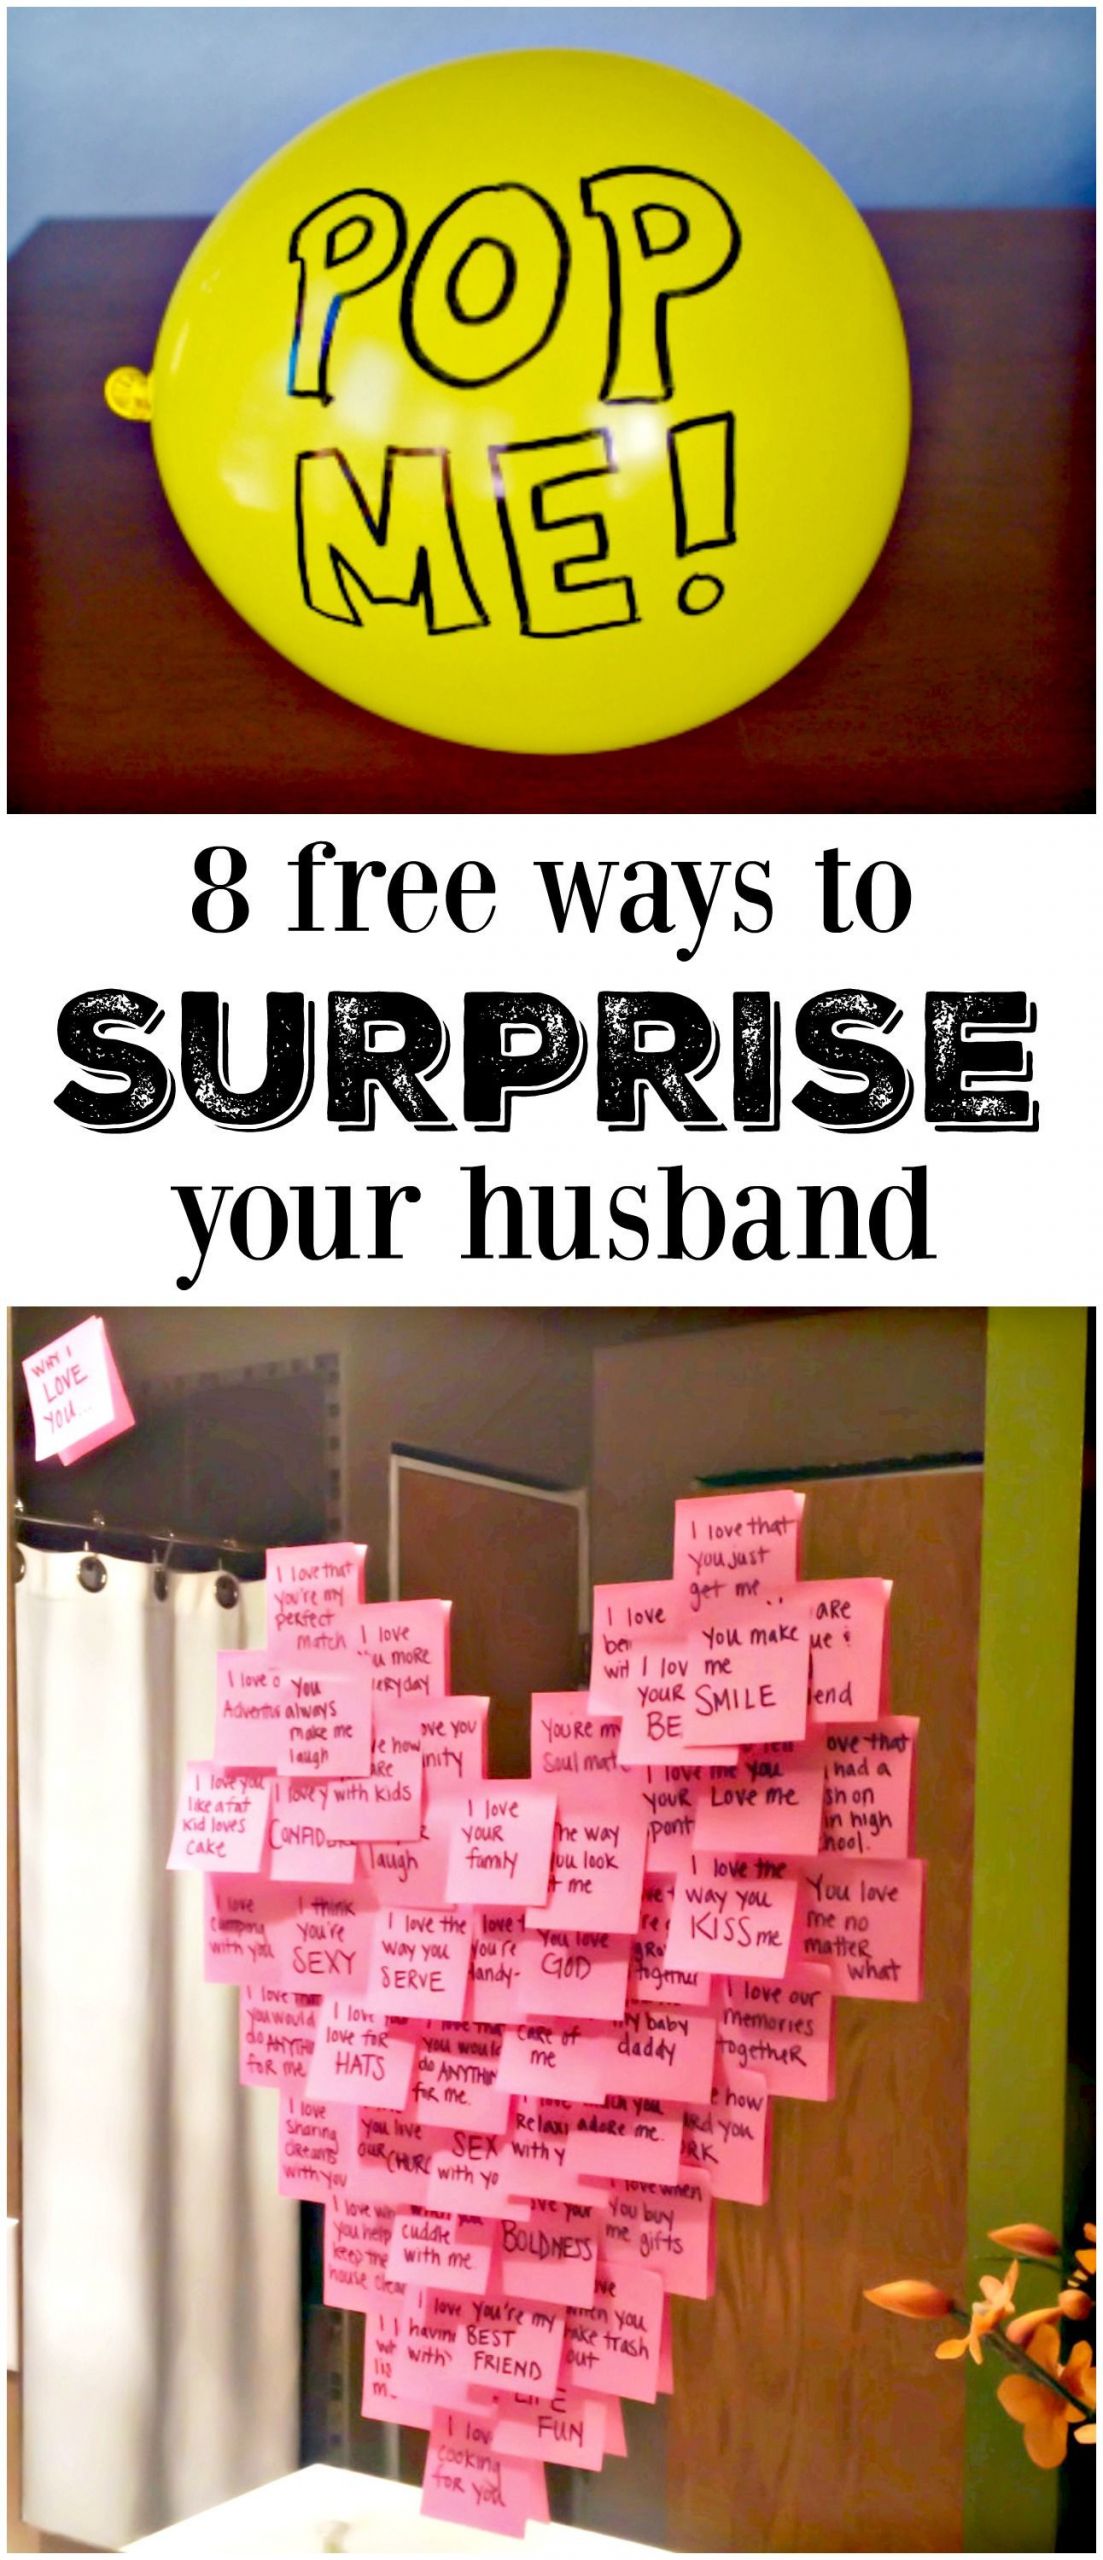 DIY Gifts For Husbands Birthday
 8 Meaningful Ways to Make His Day